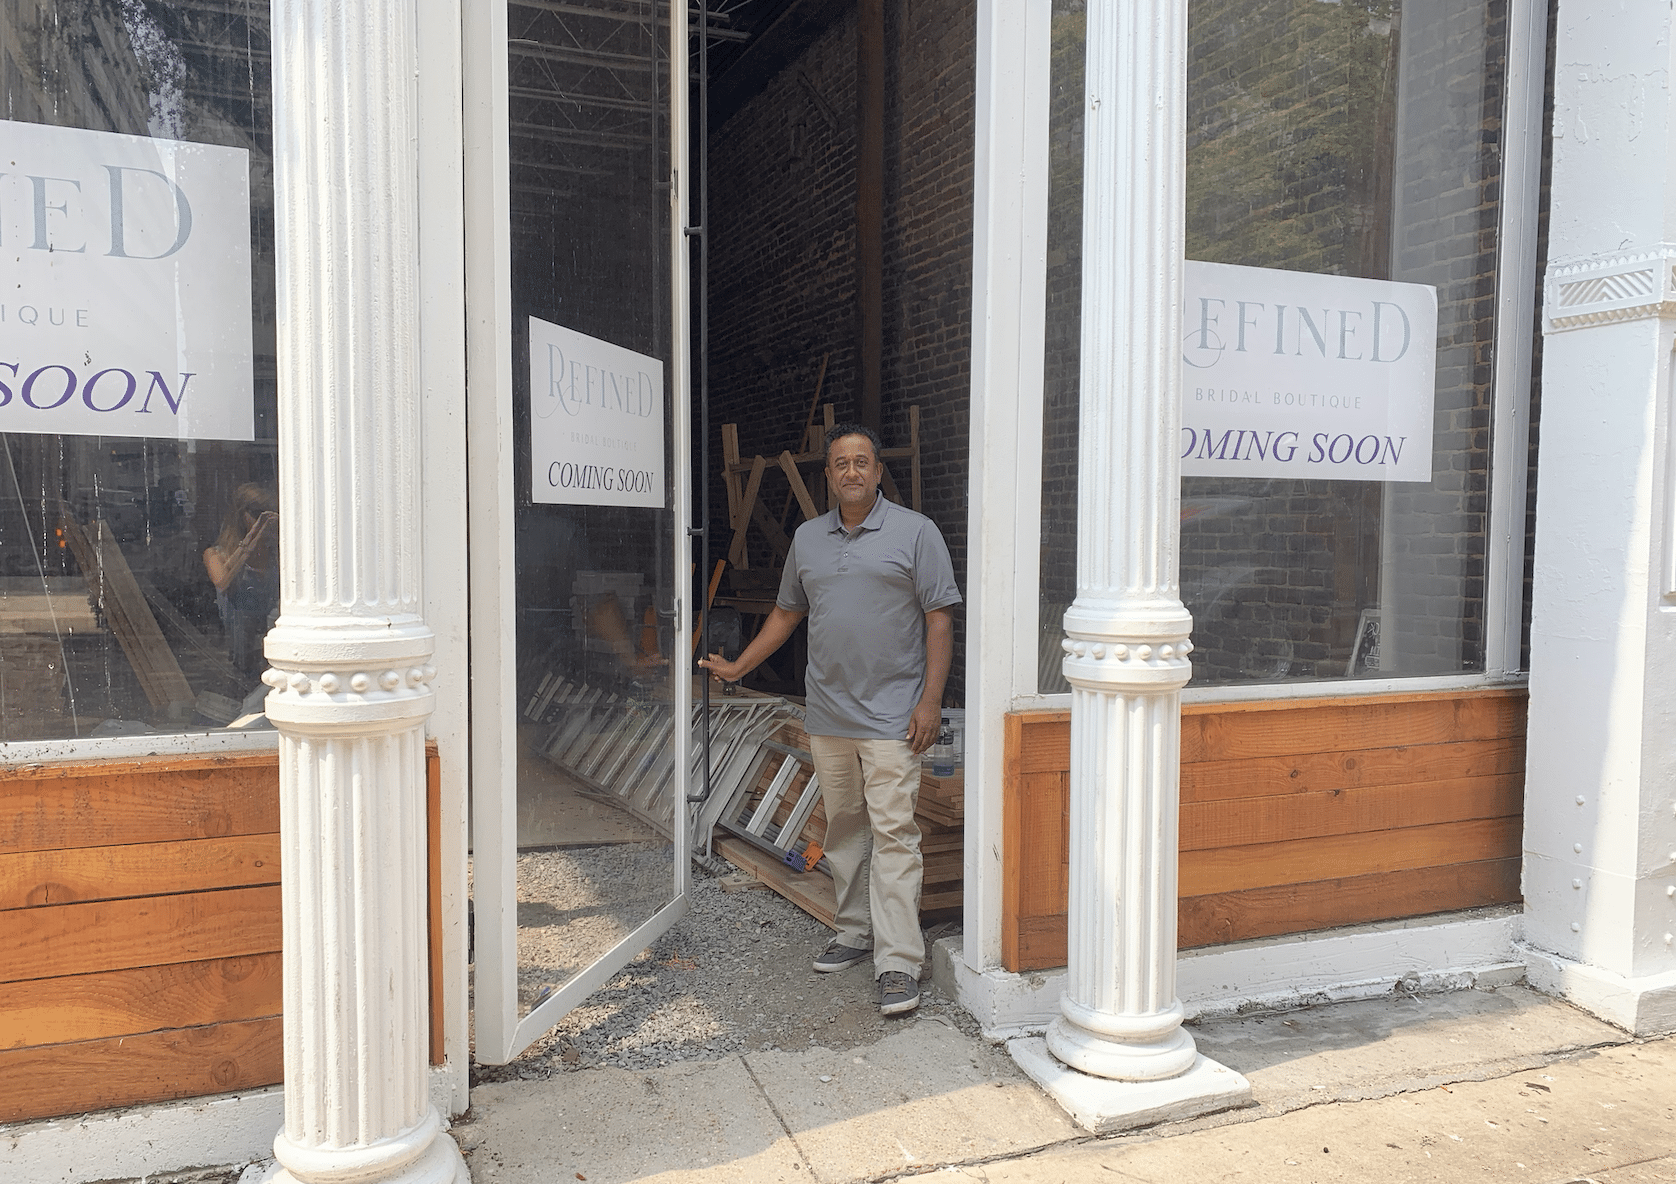 Harsha Iron Age 5 tenants announced for Iron Age Building in downtown Birmingham